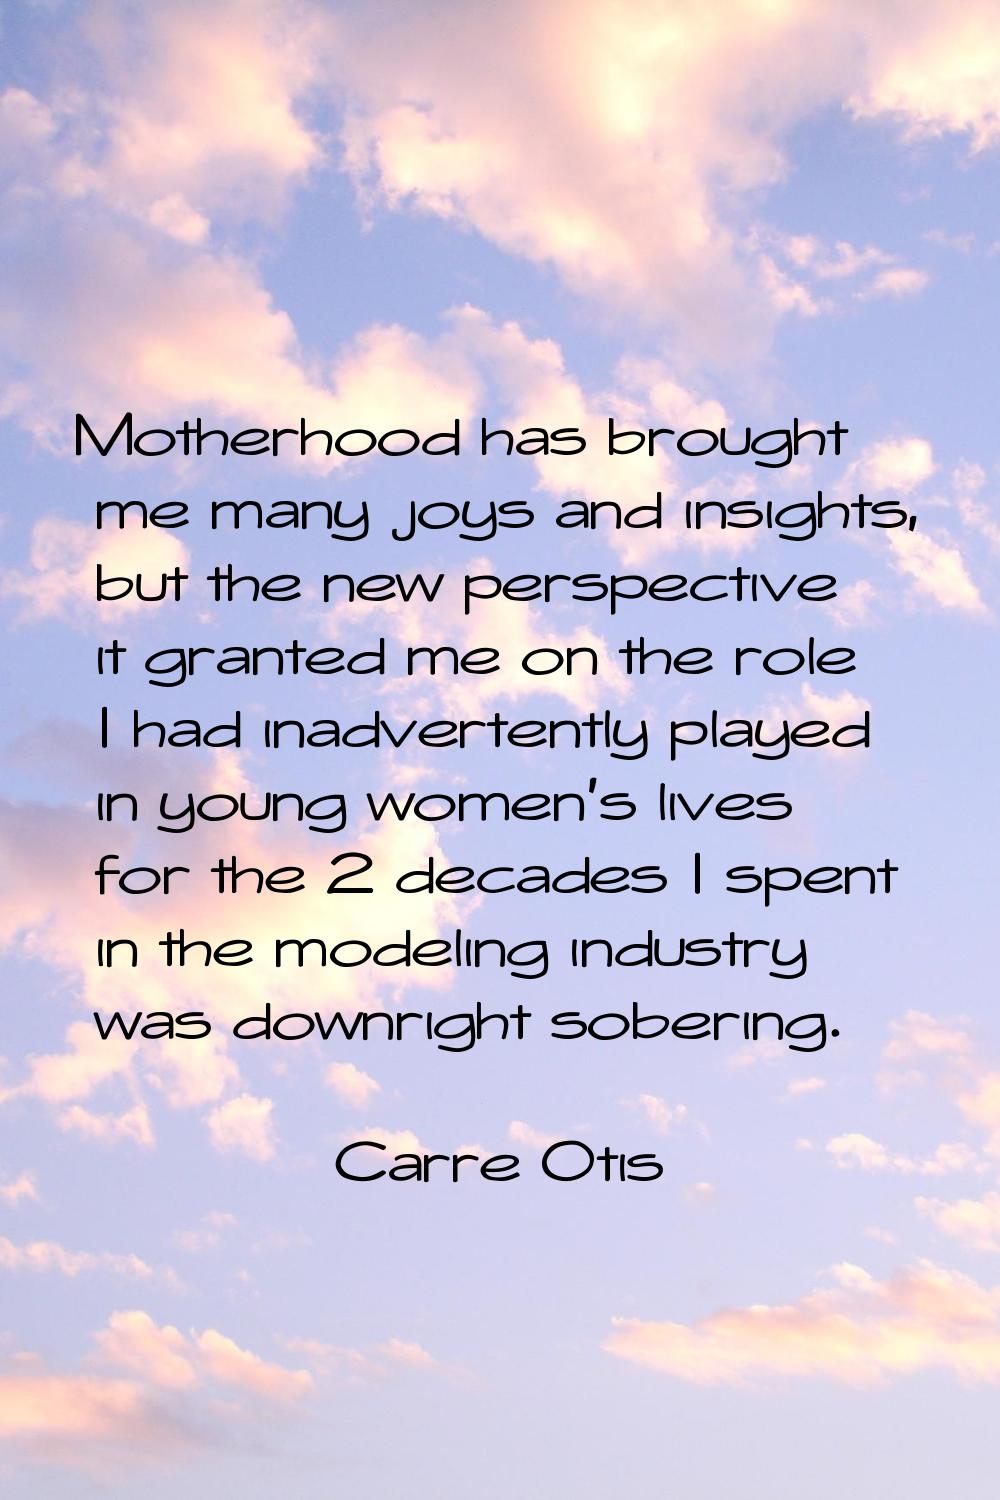 Motherhood has brought me many joys and insights, but the new perspective it granted me on the role